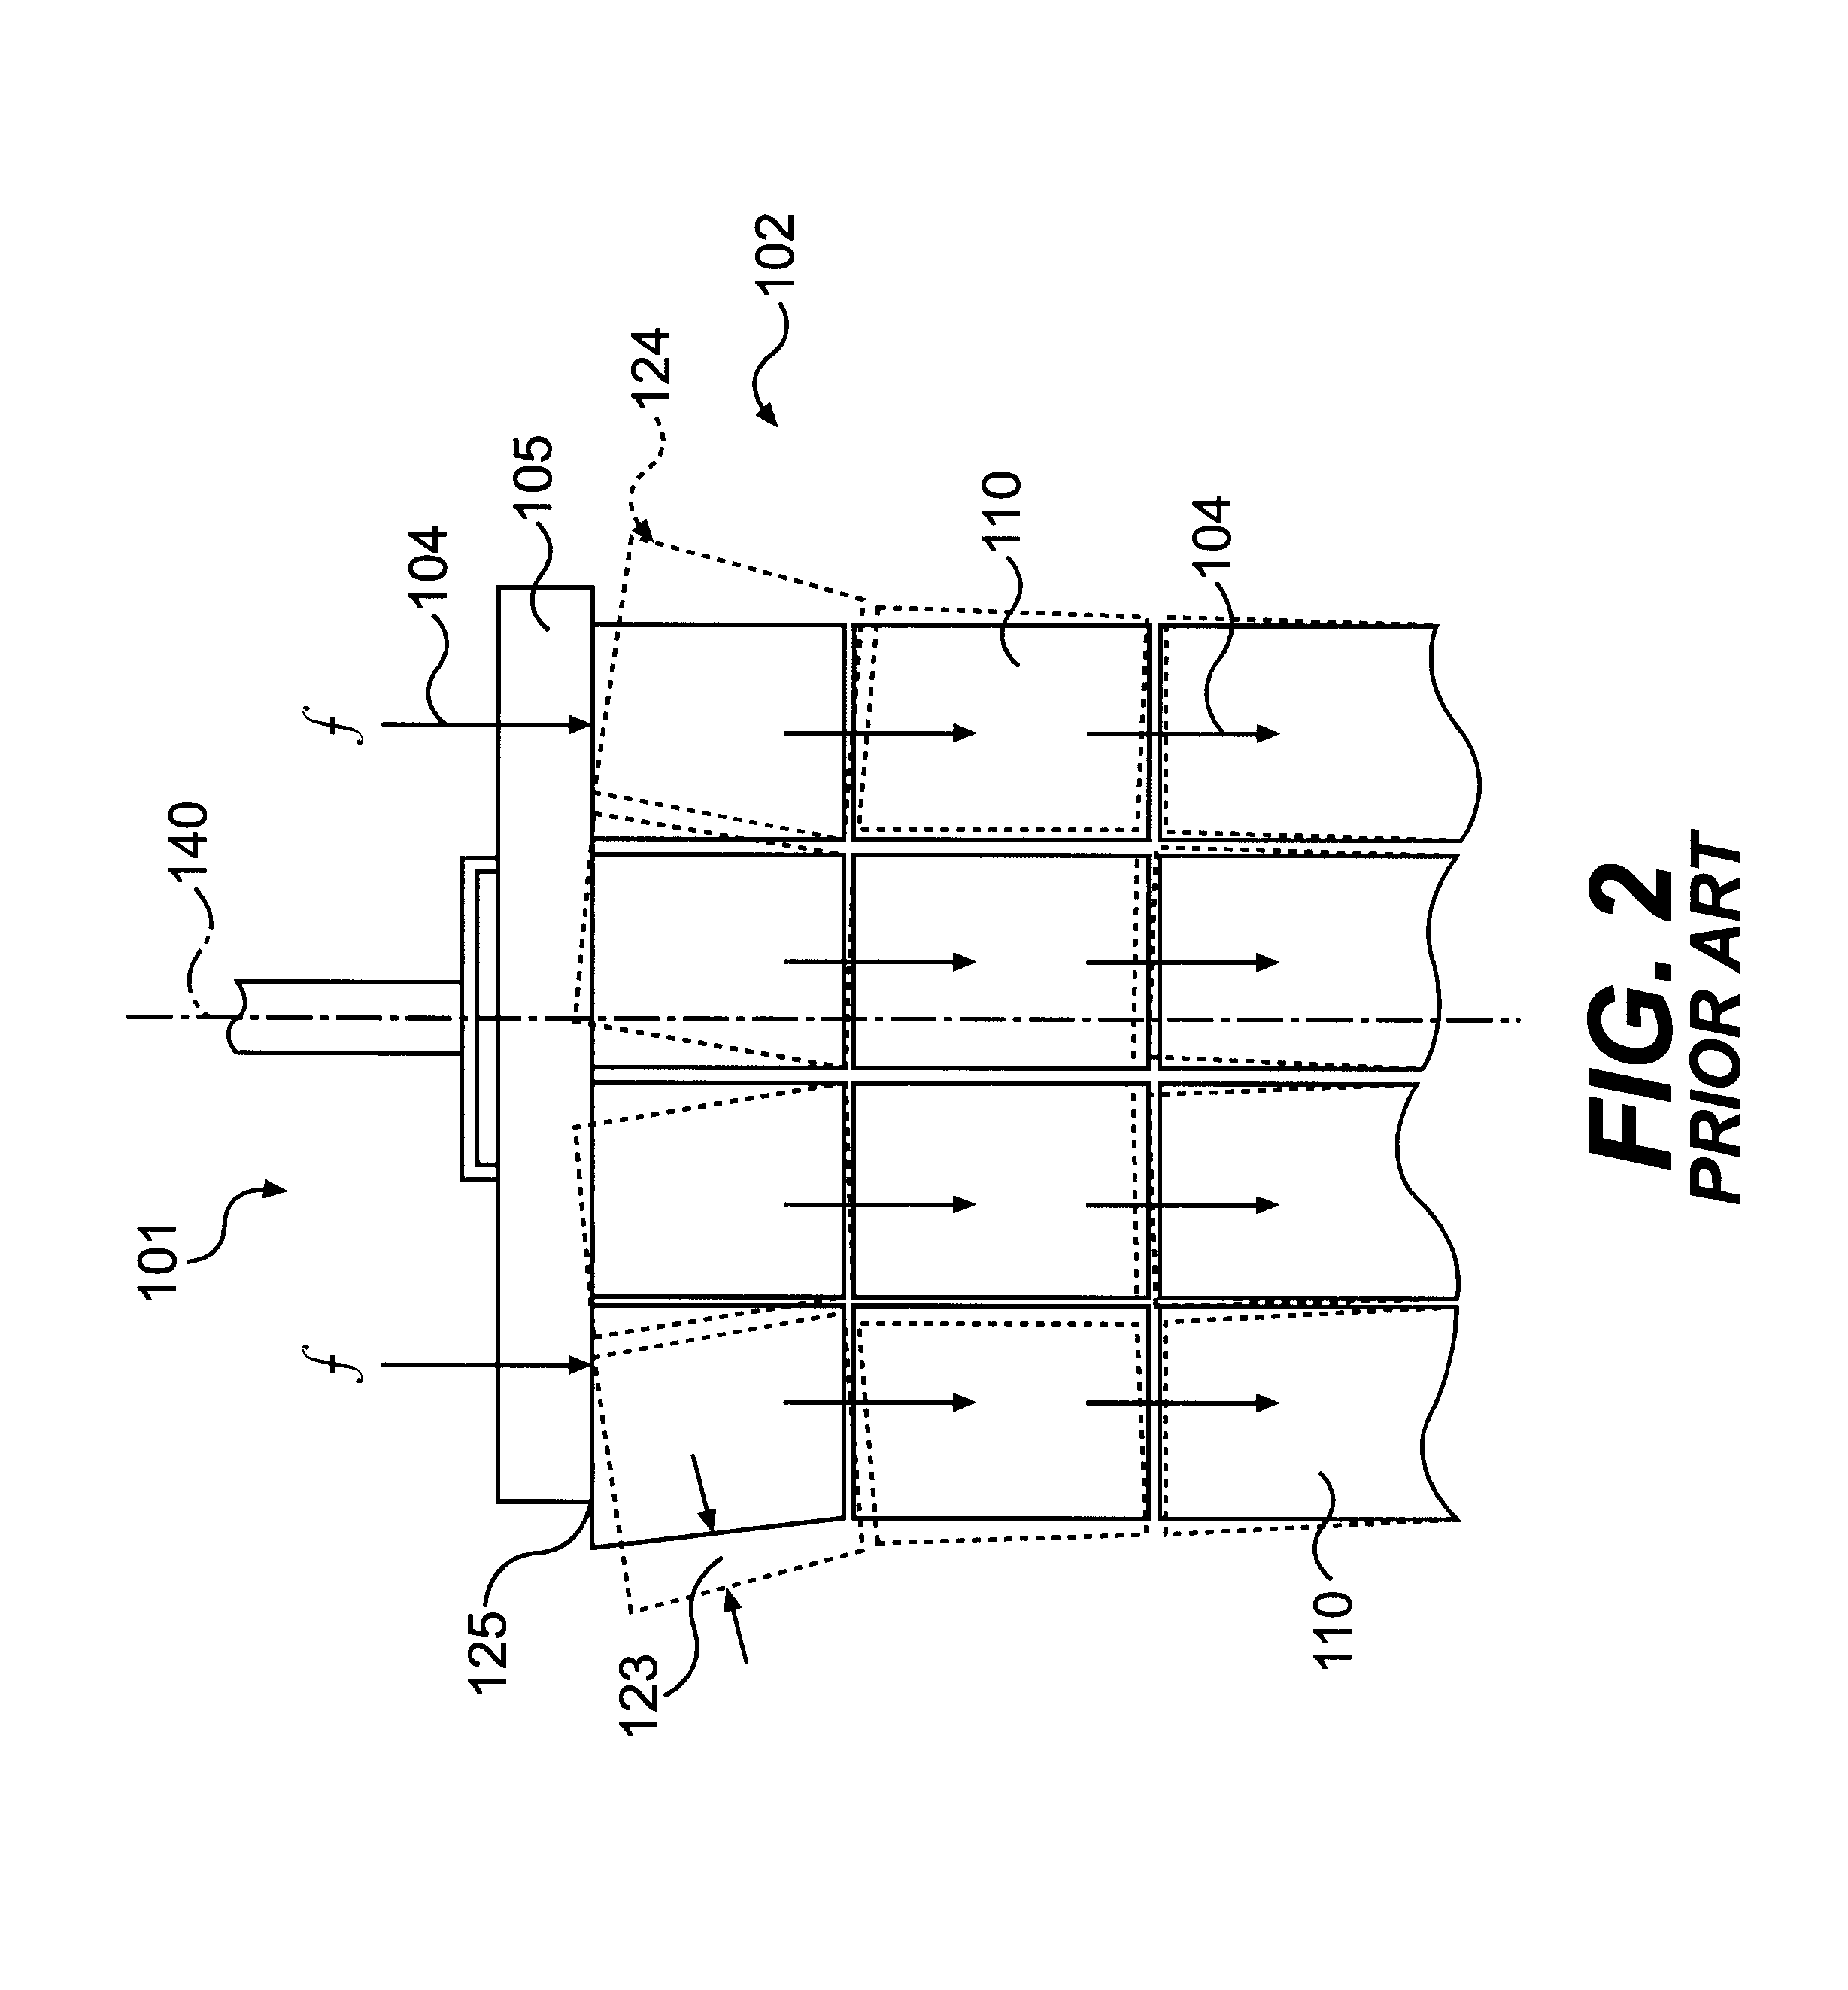 Method and apparatus for stretch wrapping a load, including a top platen